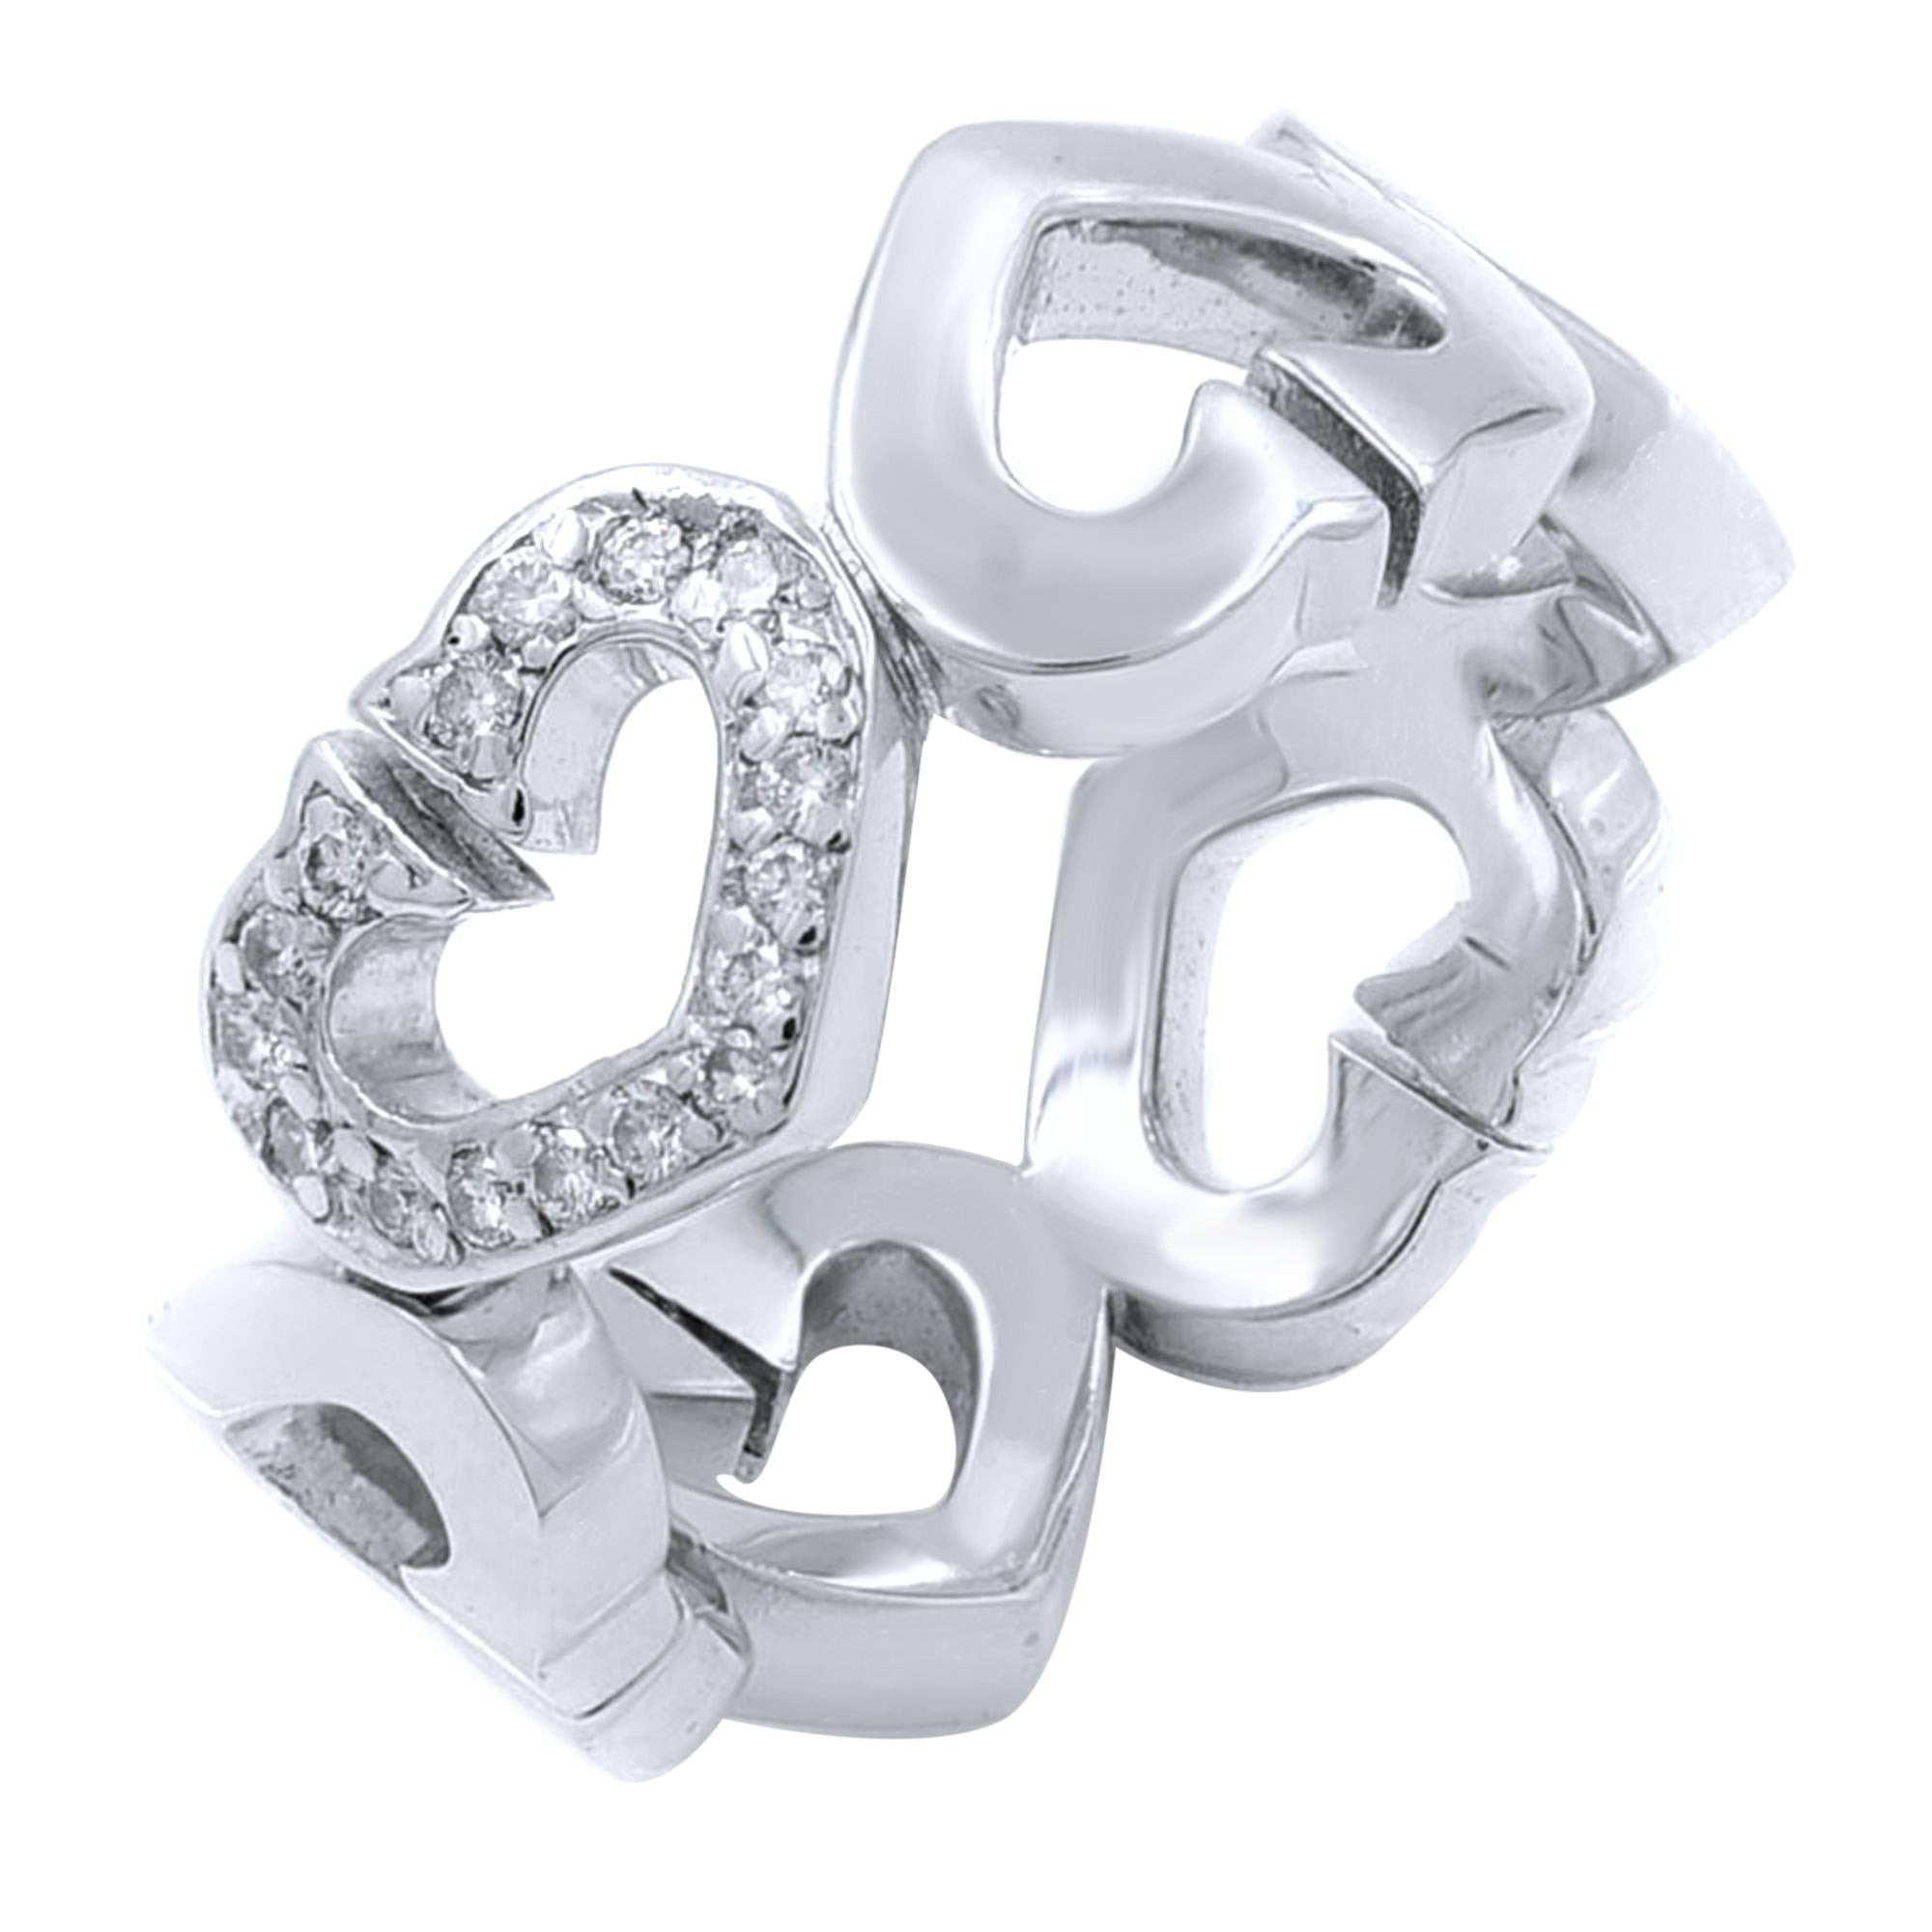 Cartier C Heart Diamond Ring 18K White Gold 0.10 Cttw Size 4.75 In Excellent Condition For Sale In New York, NY